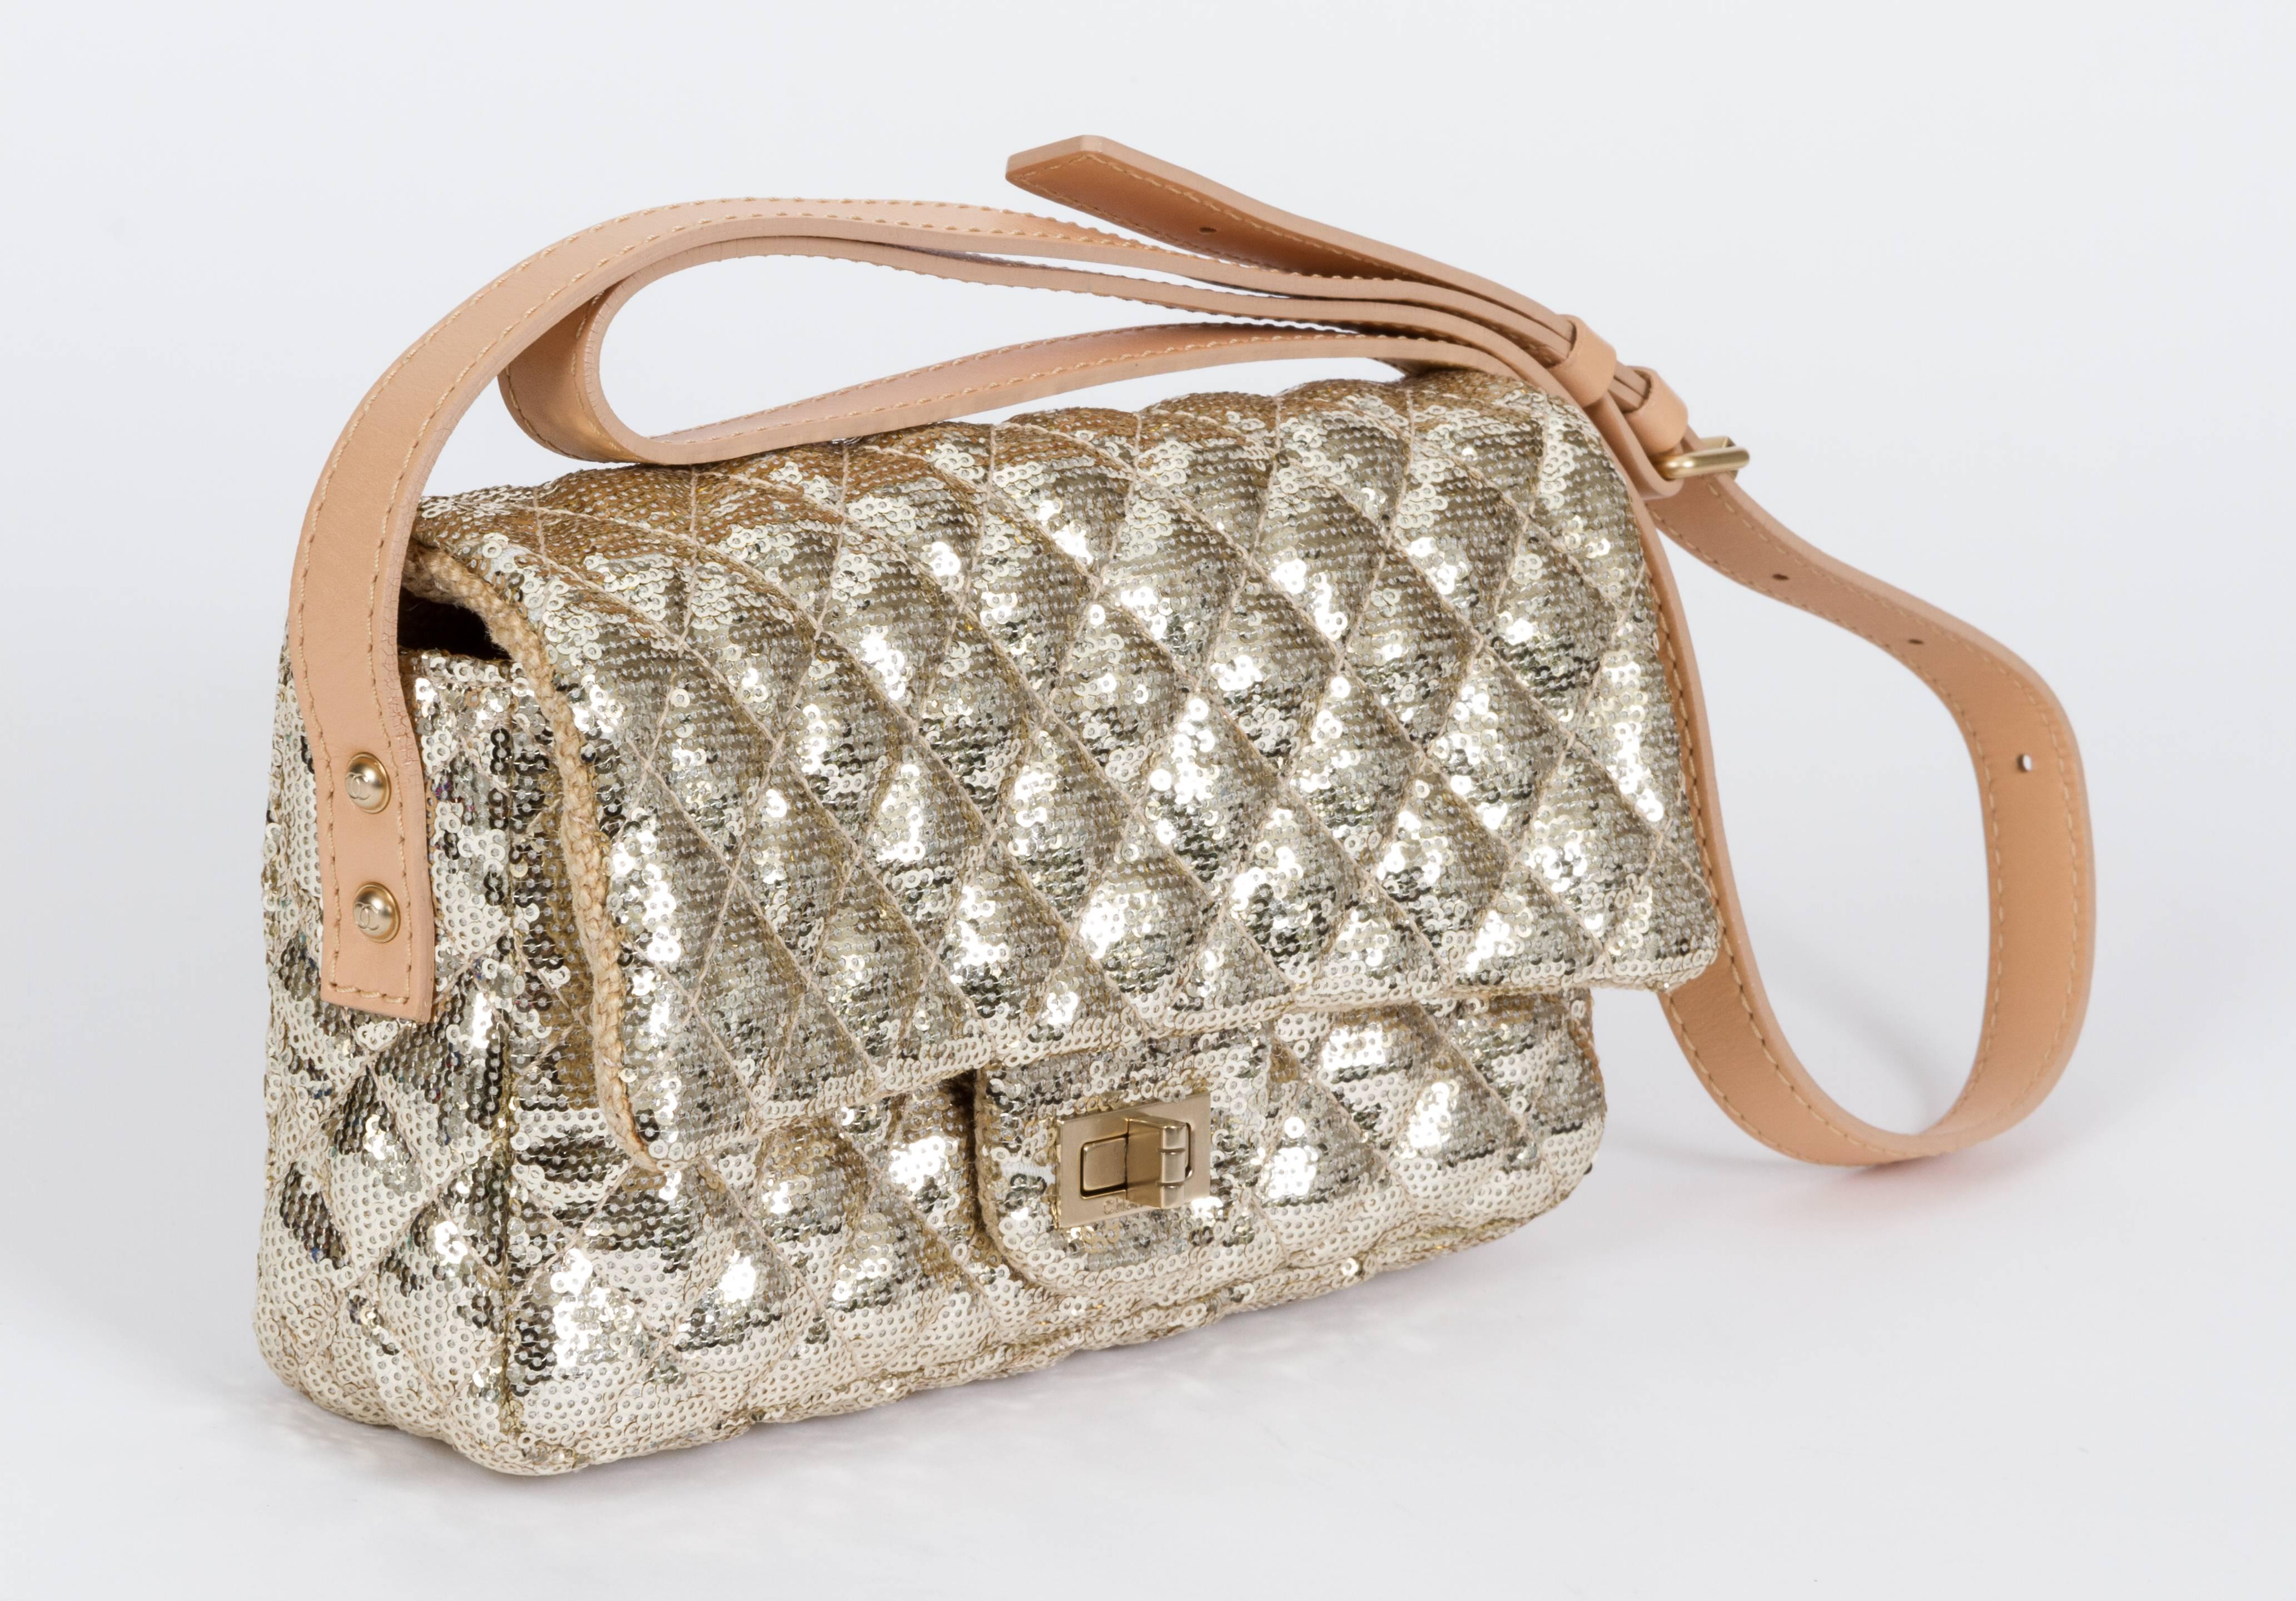 Chanel medium single flap in beige tweed with gold sequins and natural leather. Adjustable strap, can be worn shoulder or cross body. Excellent condition except a few sequins missing in the front, as shown in picture 6. Measurements: 9